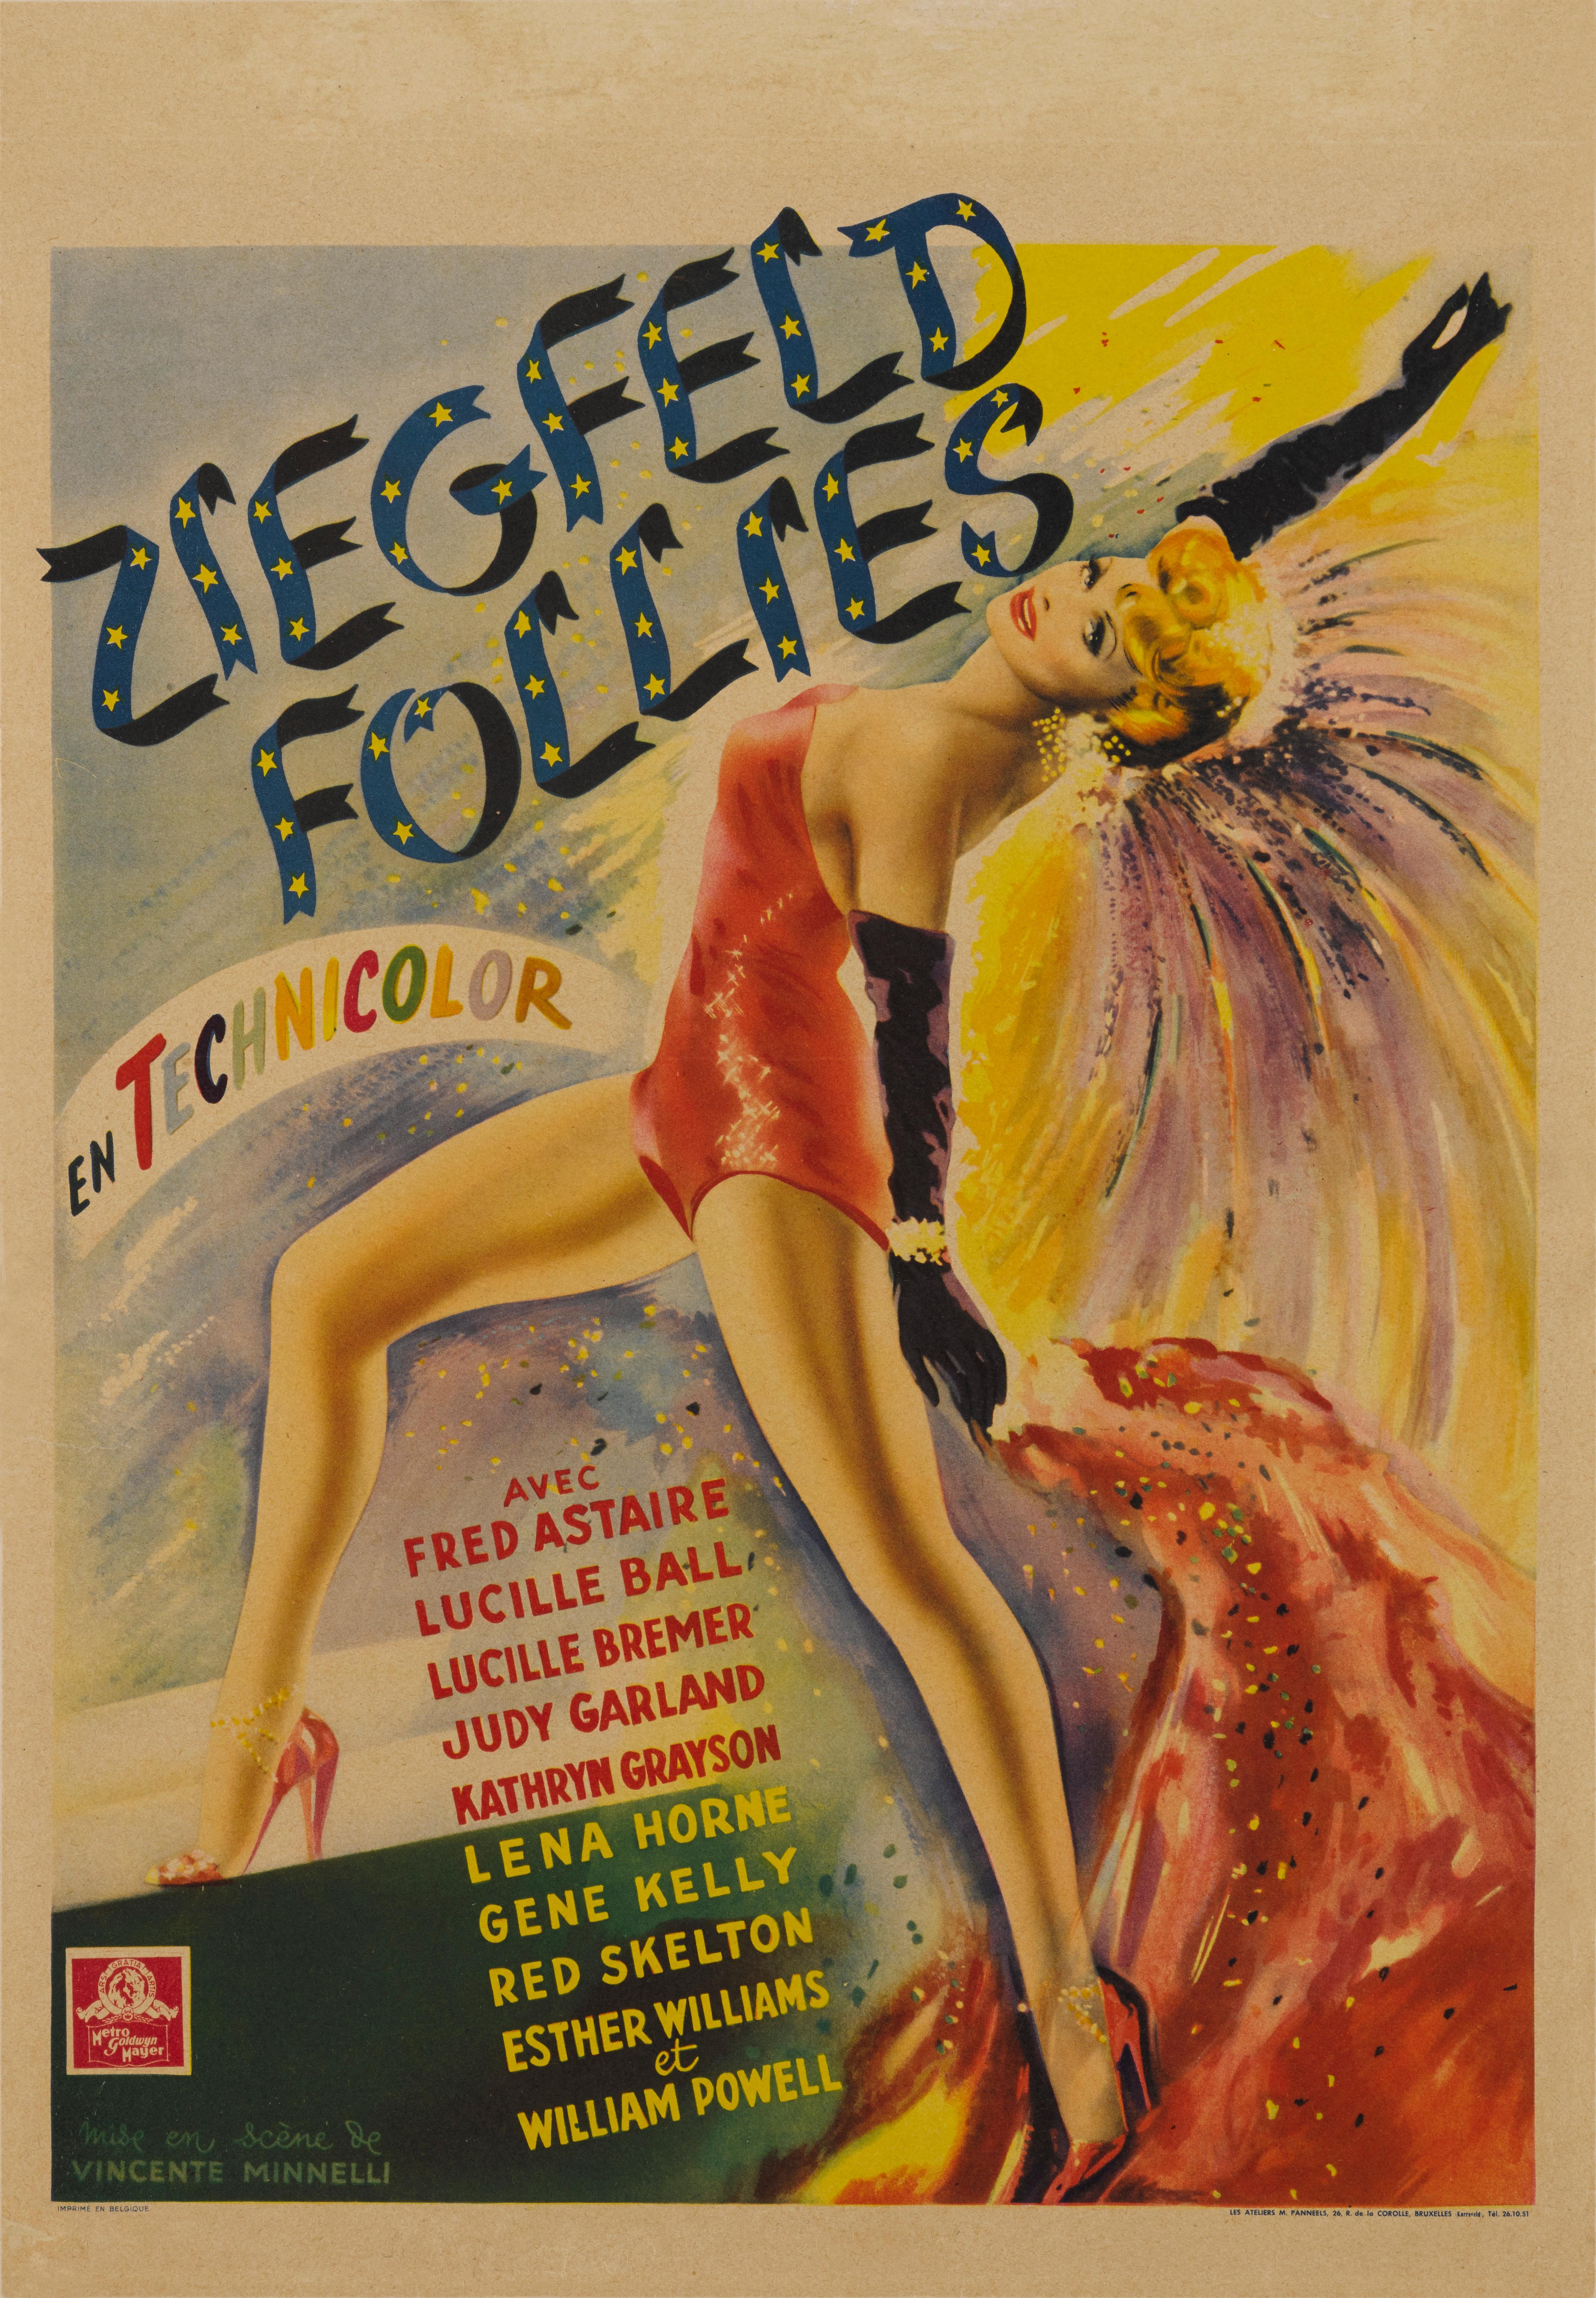 Original Belgian film poster for Ziegfeld Follies, 1945
This musical comedy was directed by Lemuel Ayers and Roy Del Ruth. It stars William Powell, Judy Garland and Lucille Ball. It is a magical story of how, even from heaven, the late, great